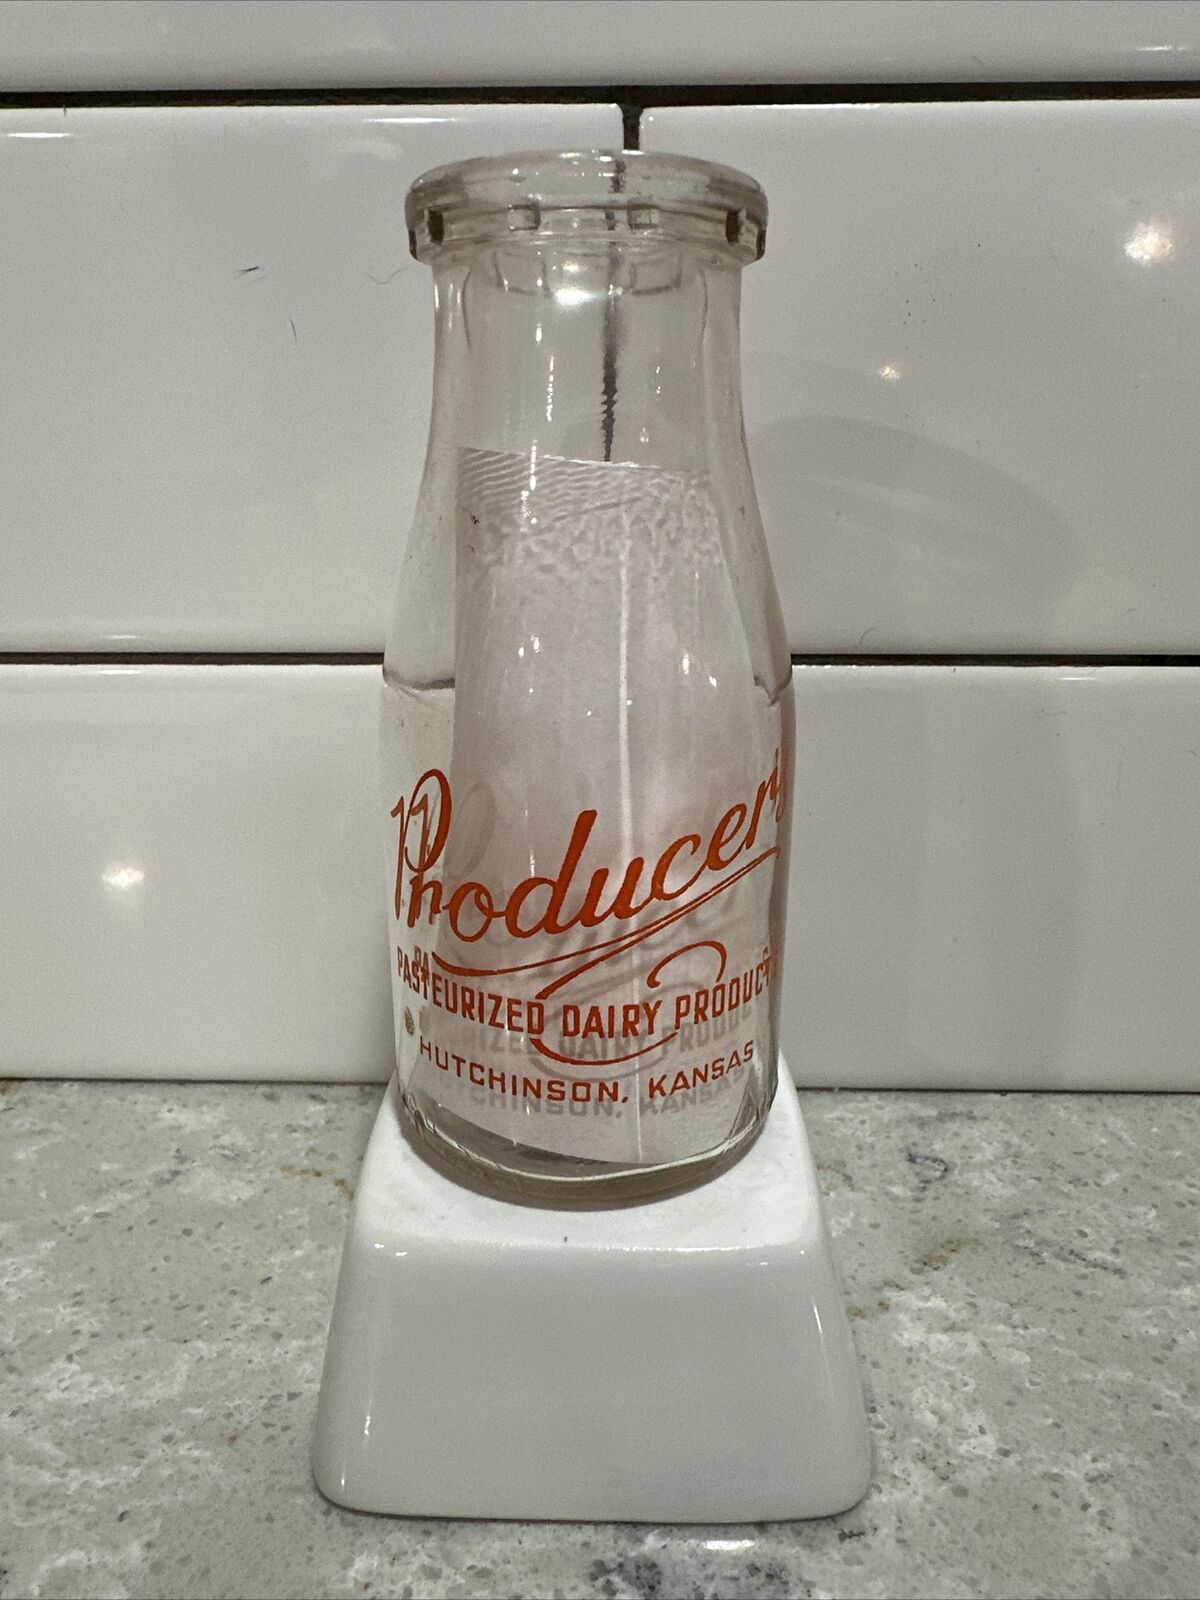 Vintage Producers Pasteurized Dairy Products Half Pint Milk Bottle